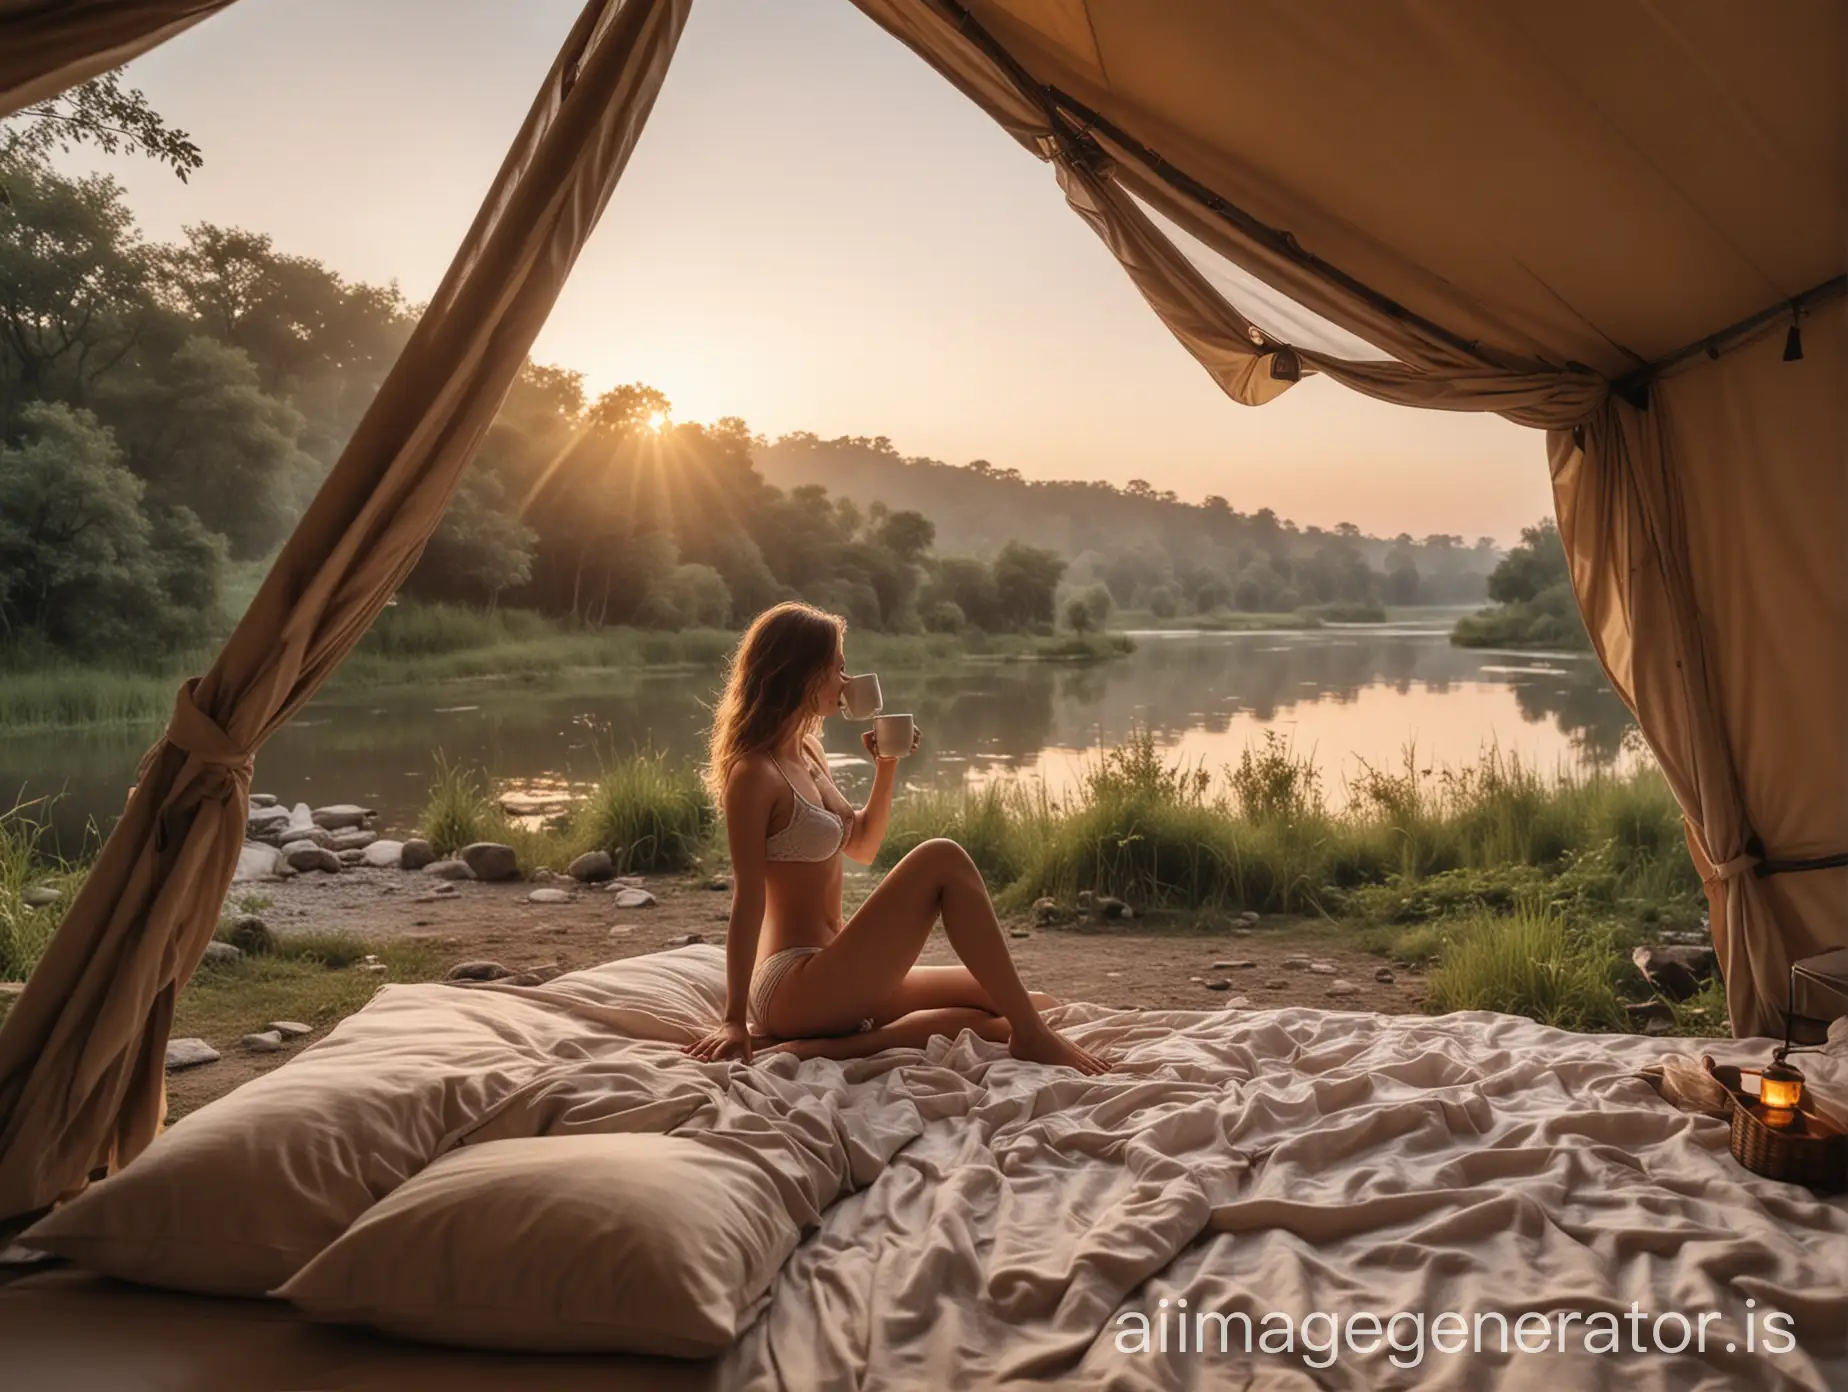 Serene-Morning-in-Nature-Young-Woman-Waking-Up-in-Glamping-Tent-with-River-View